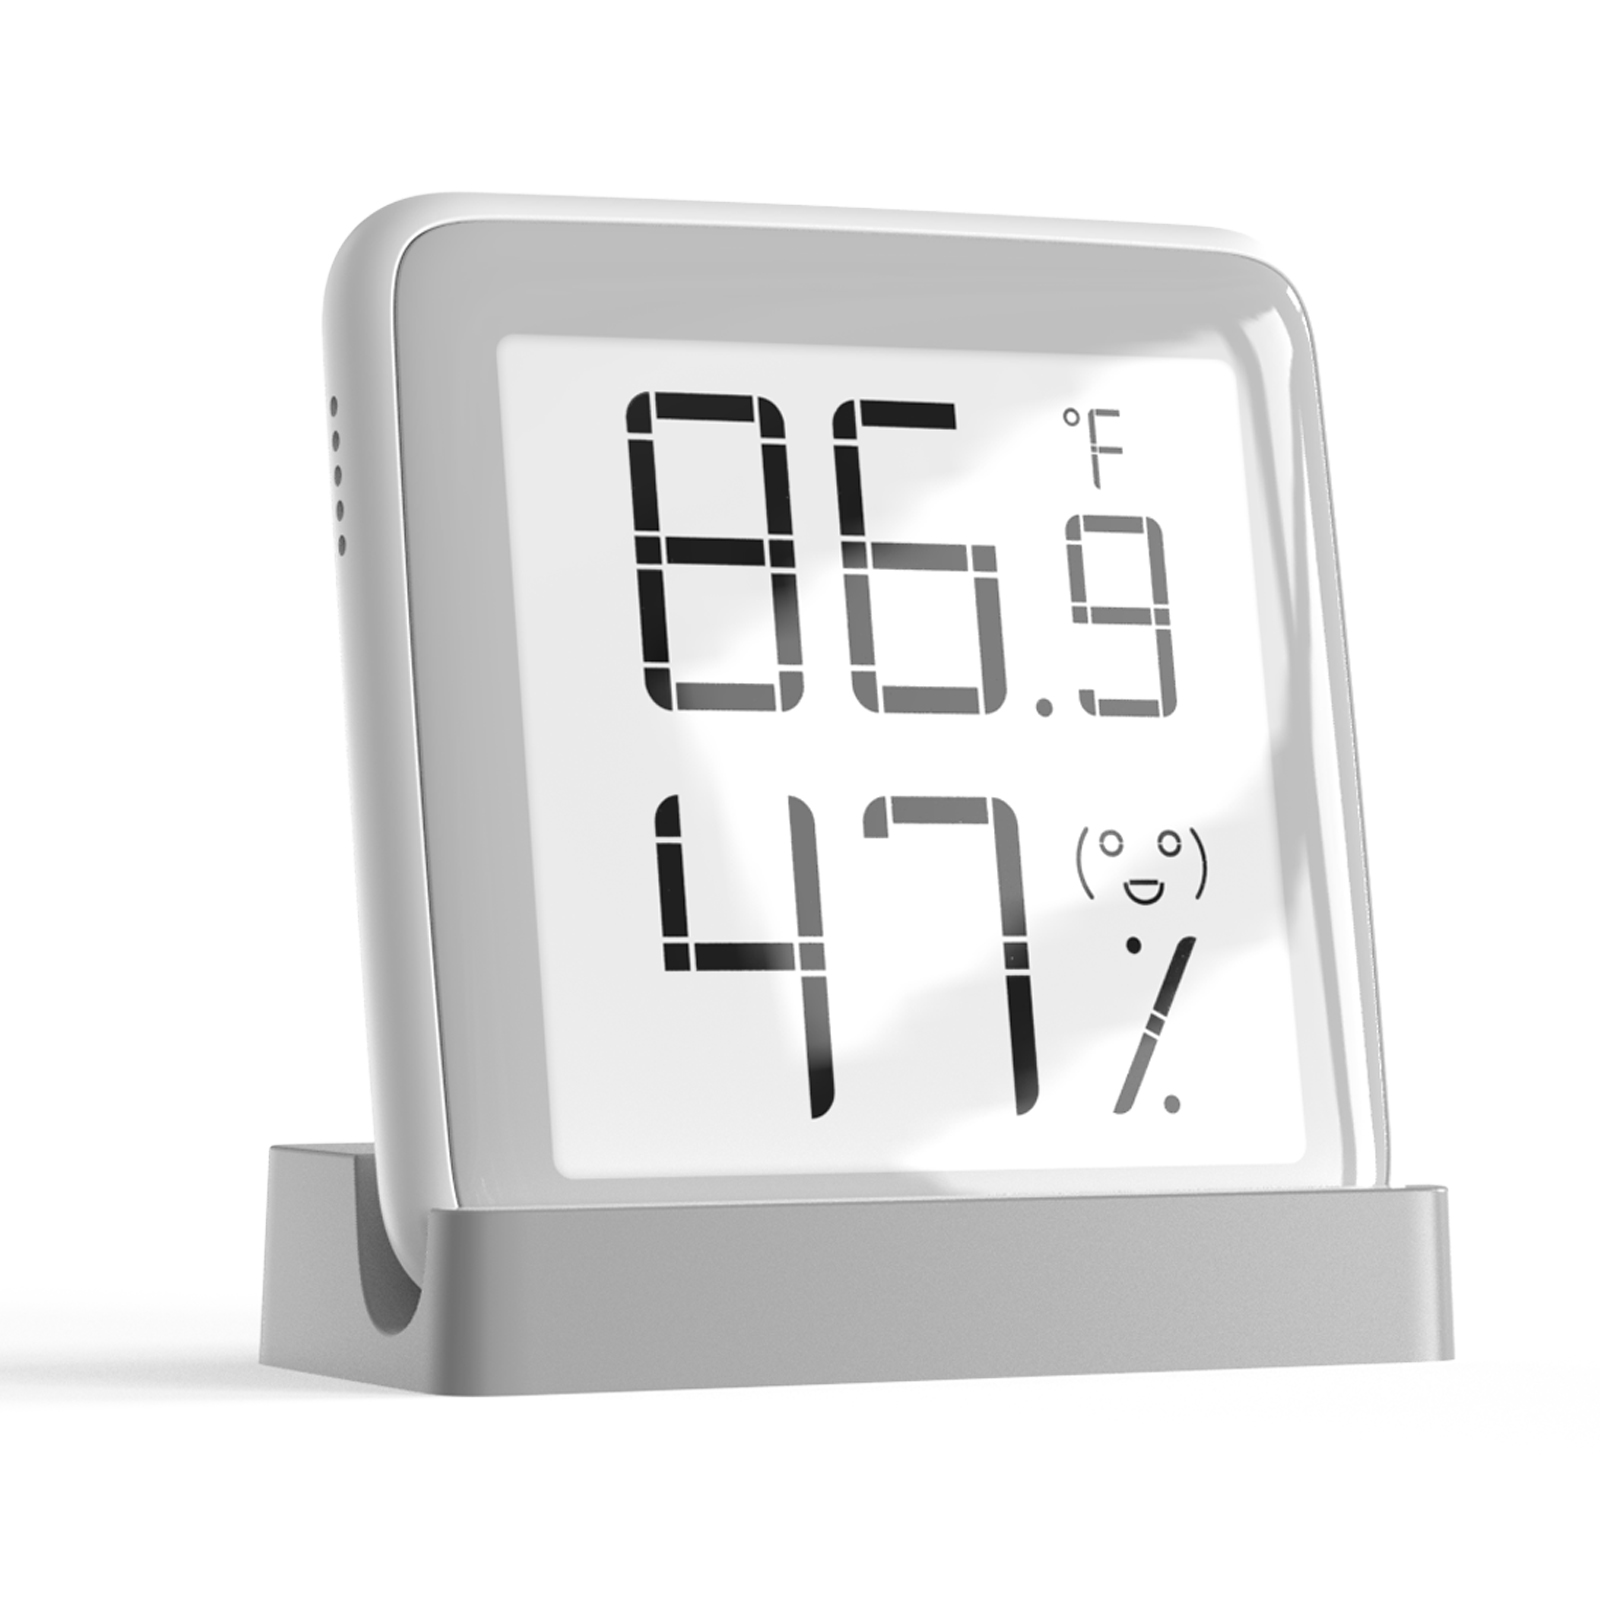 Digital Thermo-Hygrometer E-ink Display